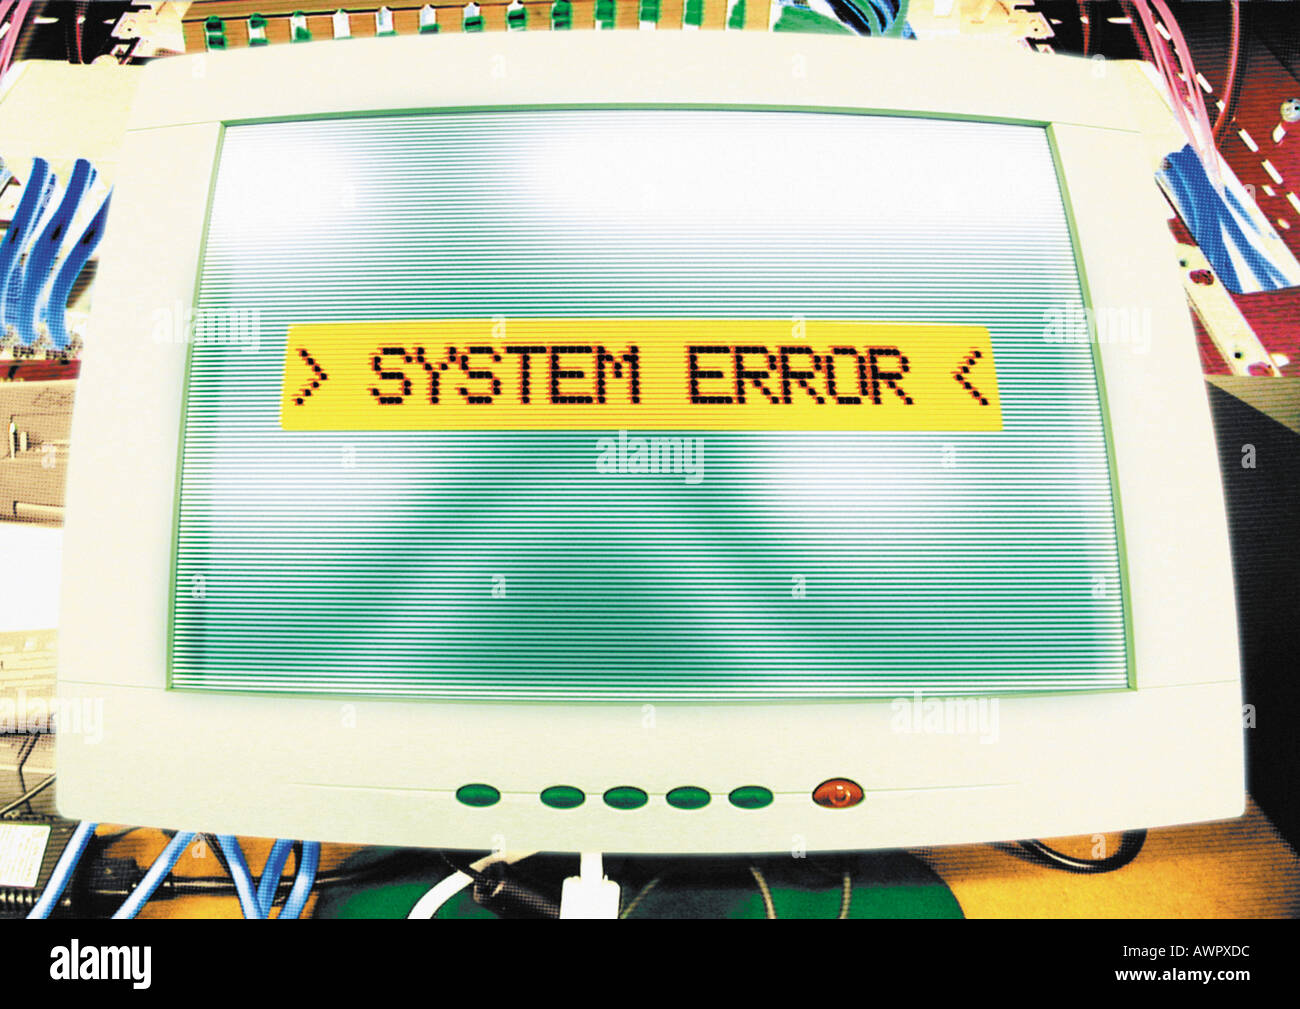 Computer 'systems error' message on screen, digital composite. Stock Photo